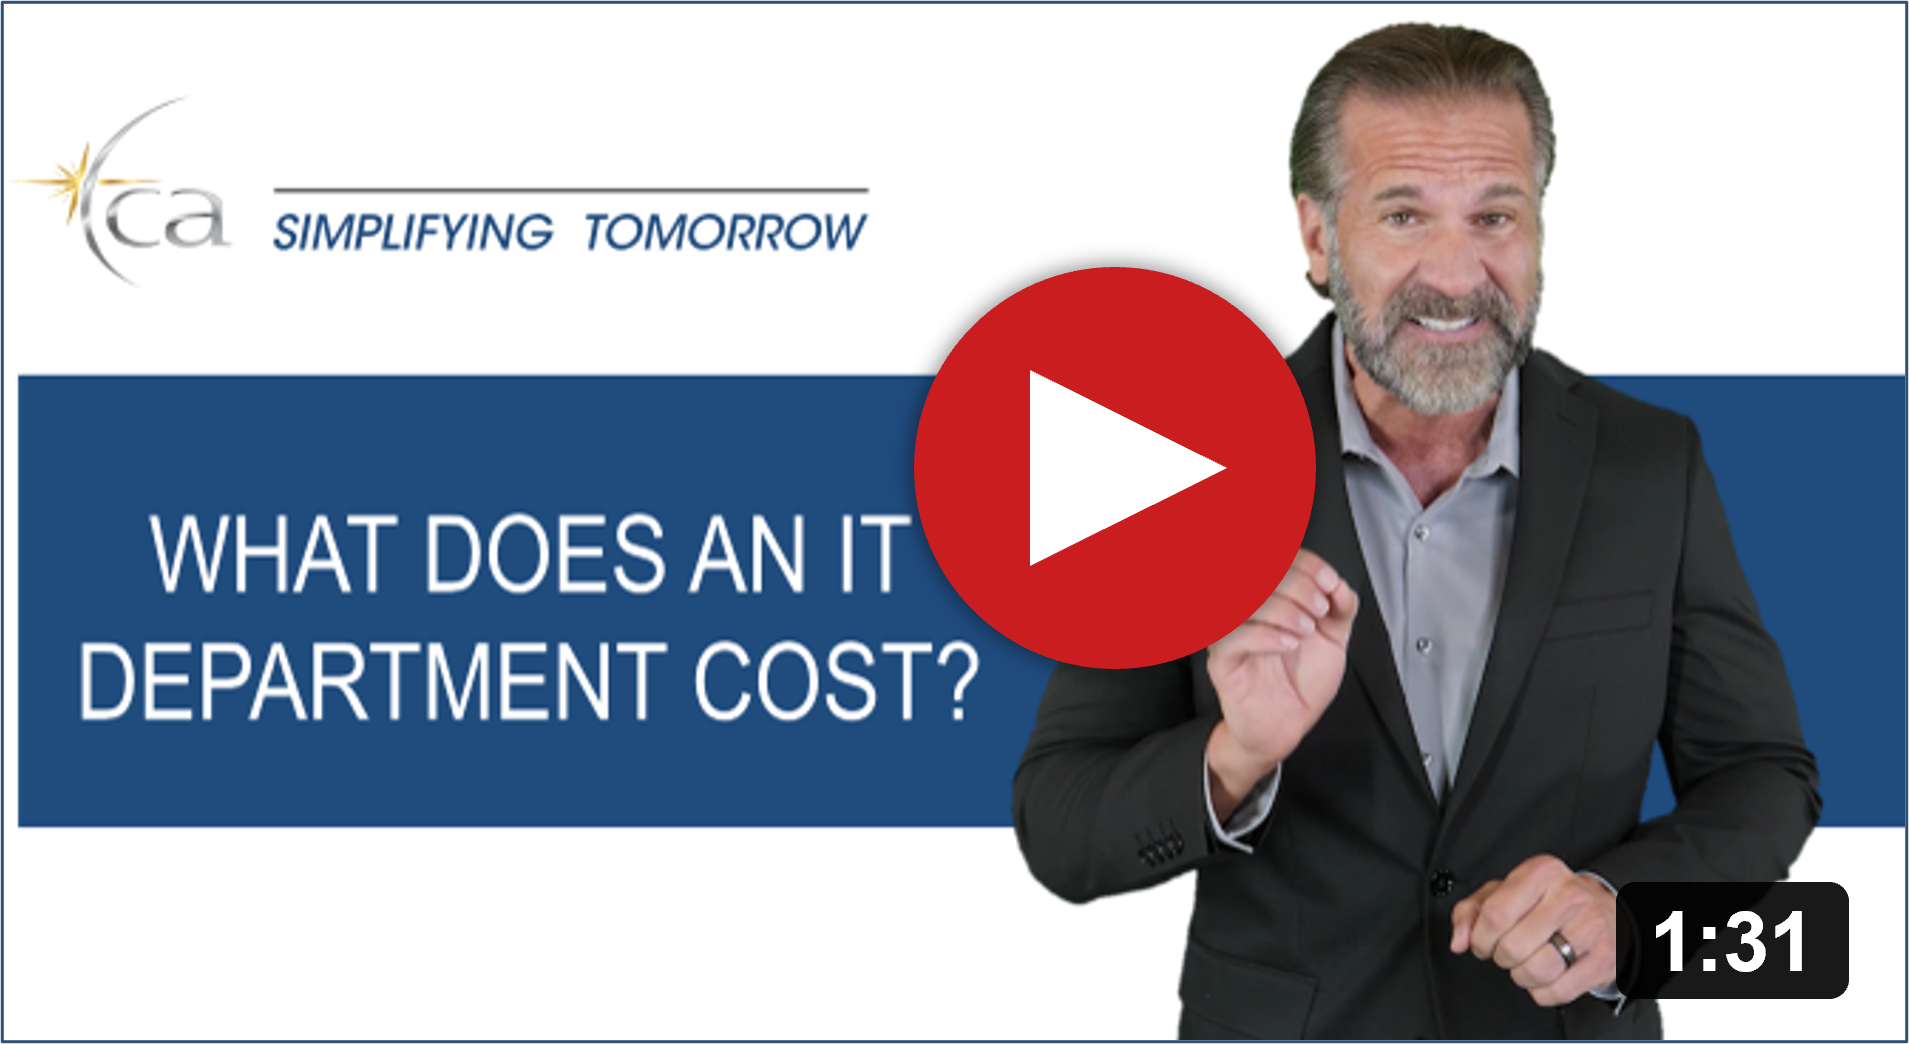 What does an IT department cost?